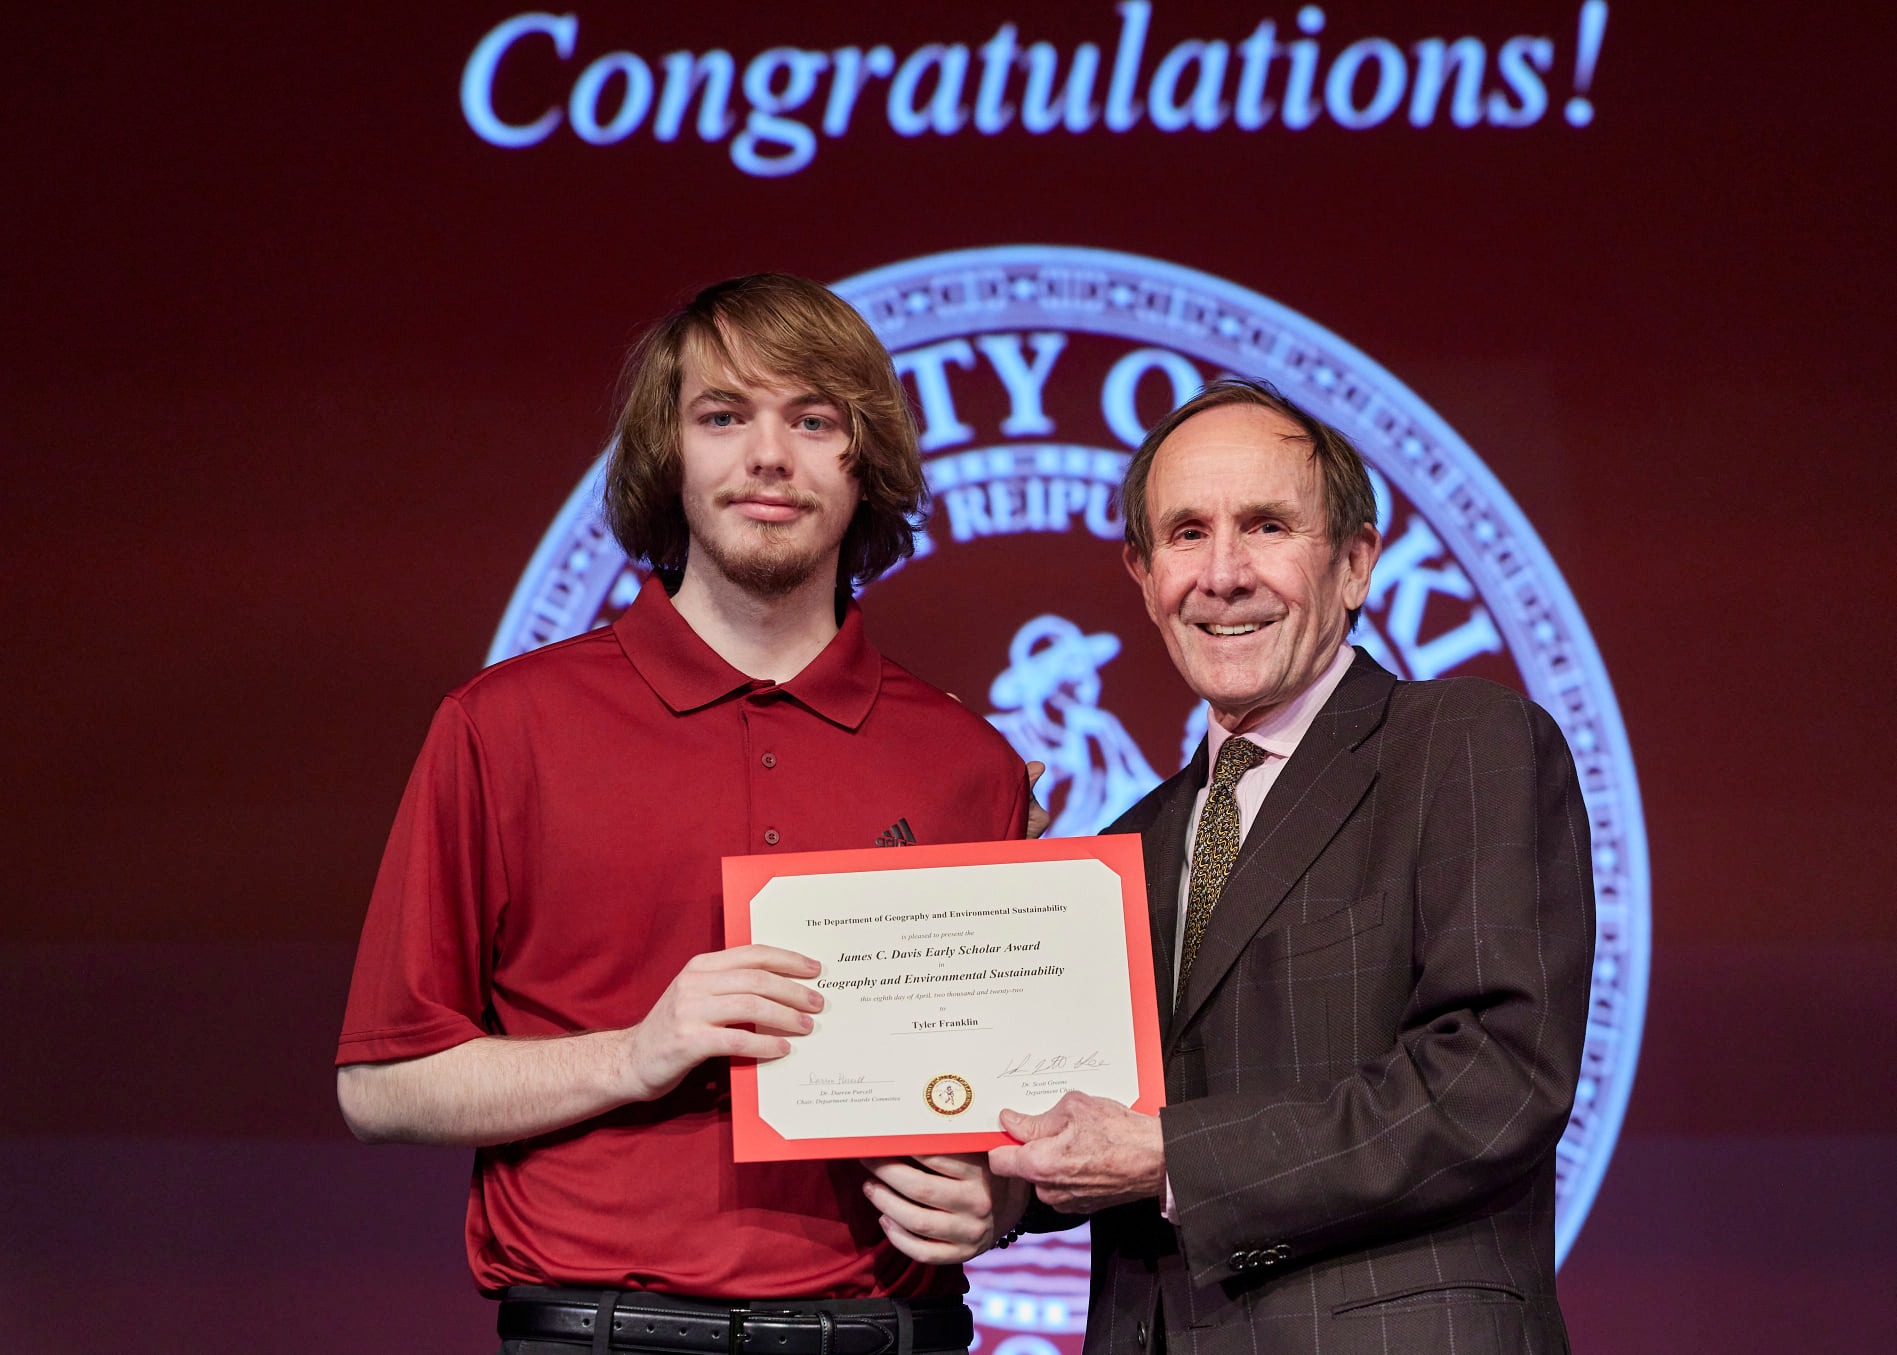 James C. Davis Early Scholar in Geography & Environmental Sustainability - Tyler franklin with Dean Berrien Moore